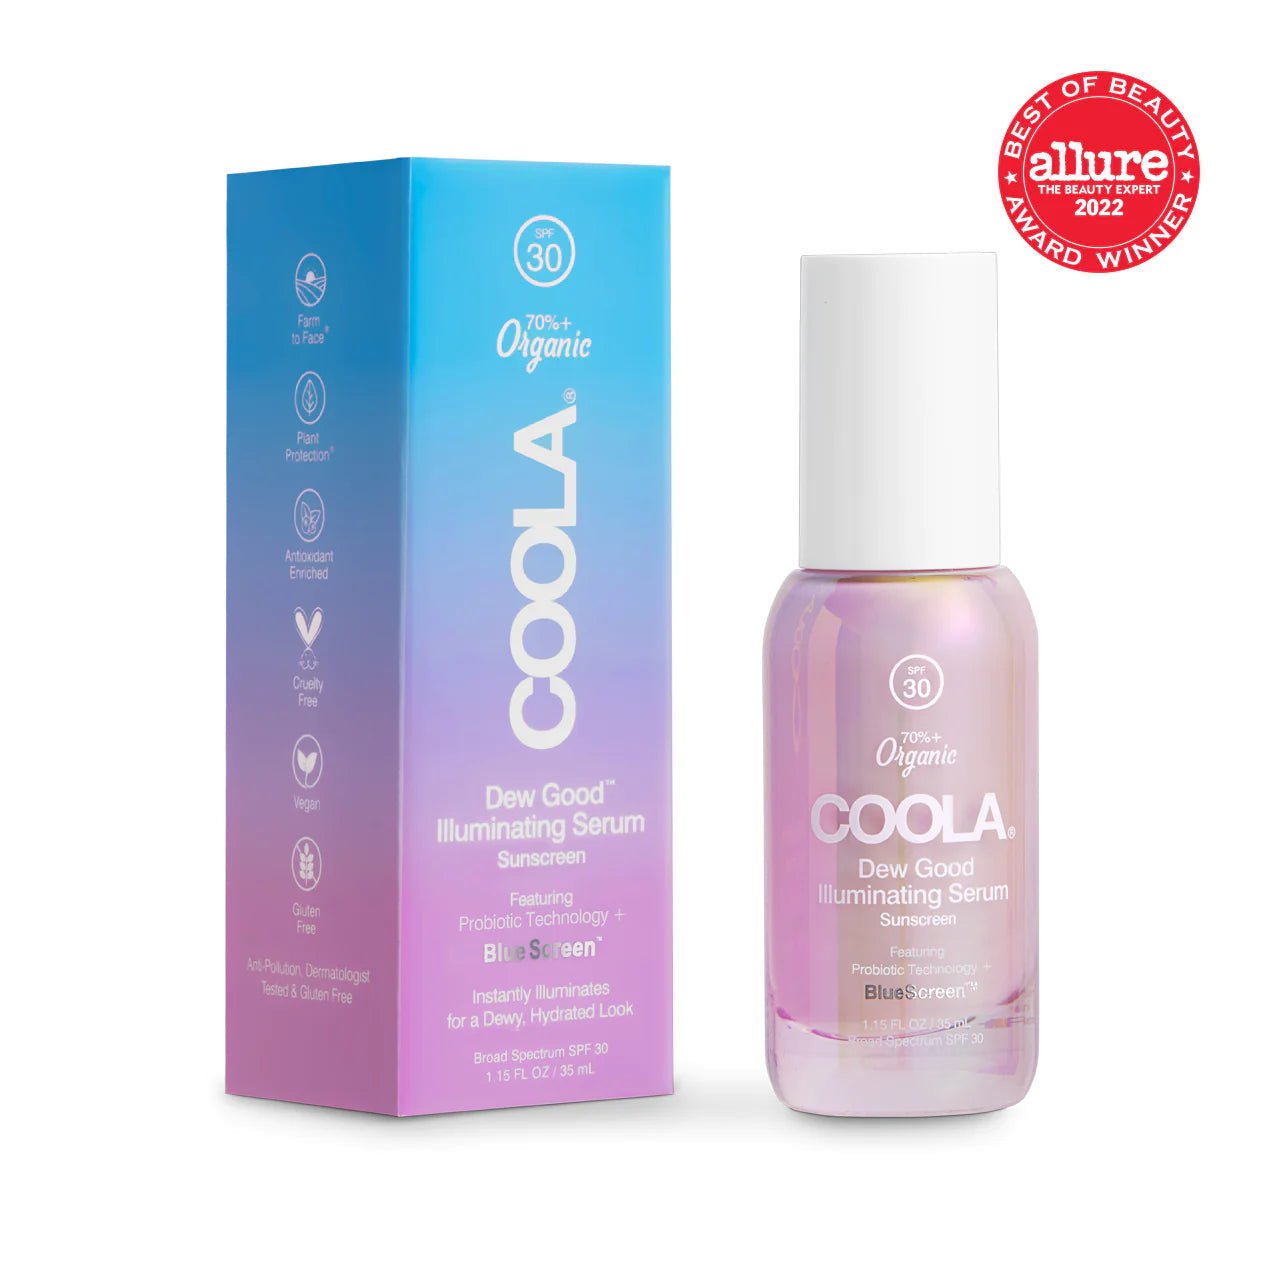 Dew Good Illuminating Serum Sunscreen with Probiotic Technology SPF 30 - Espace Skins Montreal